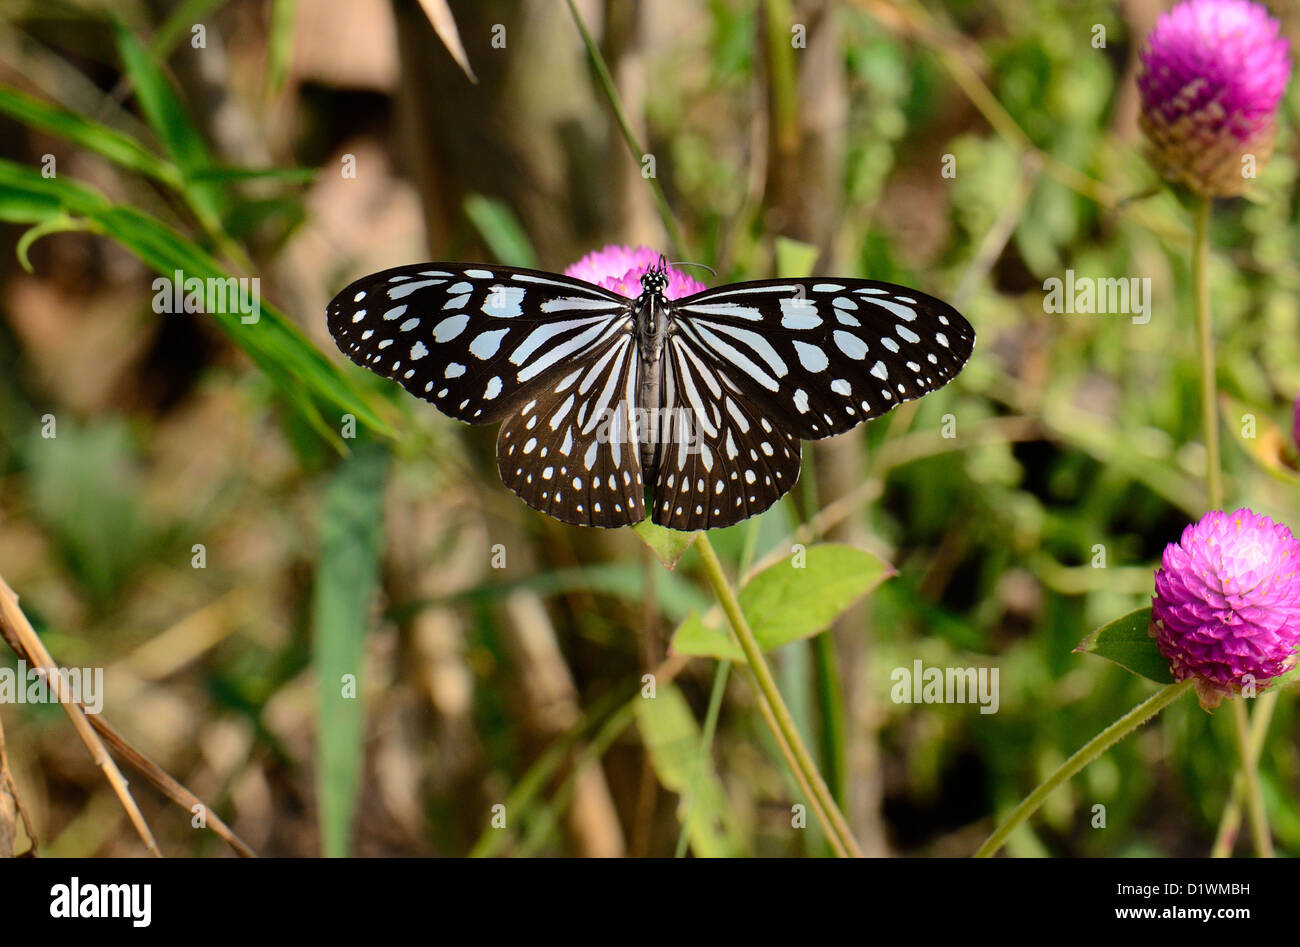 beautiful Pale Blue Tiger butterfly (Tirumala limniace) on flower near the road track Stock Photo